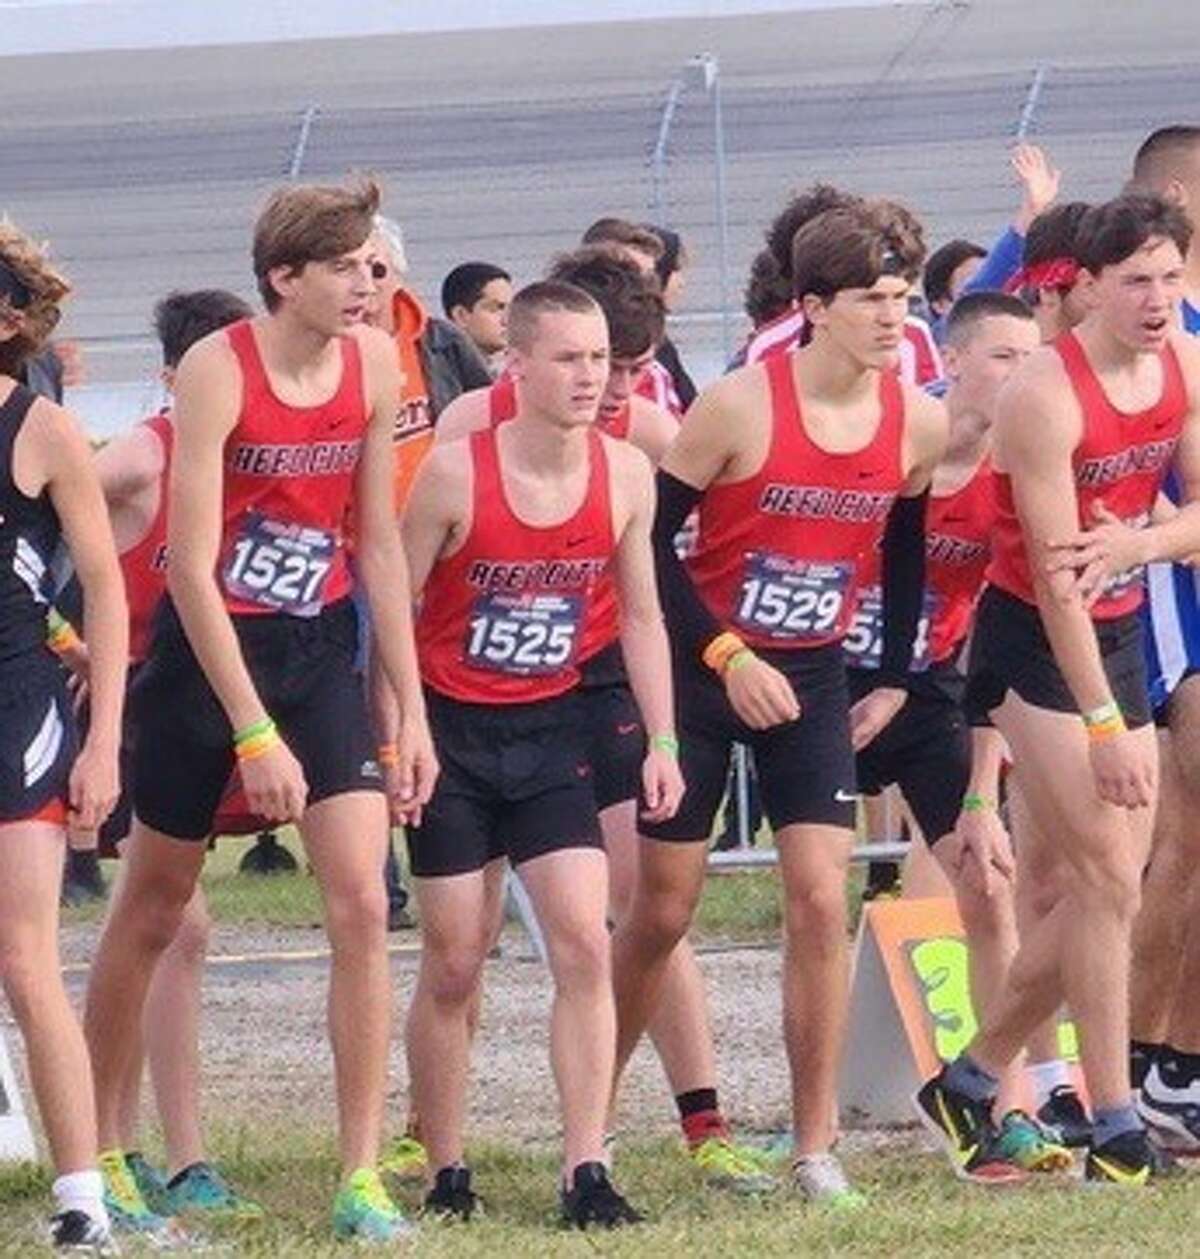 Reed City's boys cross country team starts its state meet race on Saturday at the Michigan International Speedway.